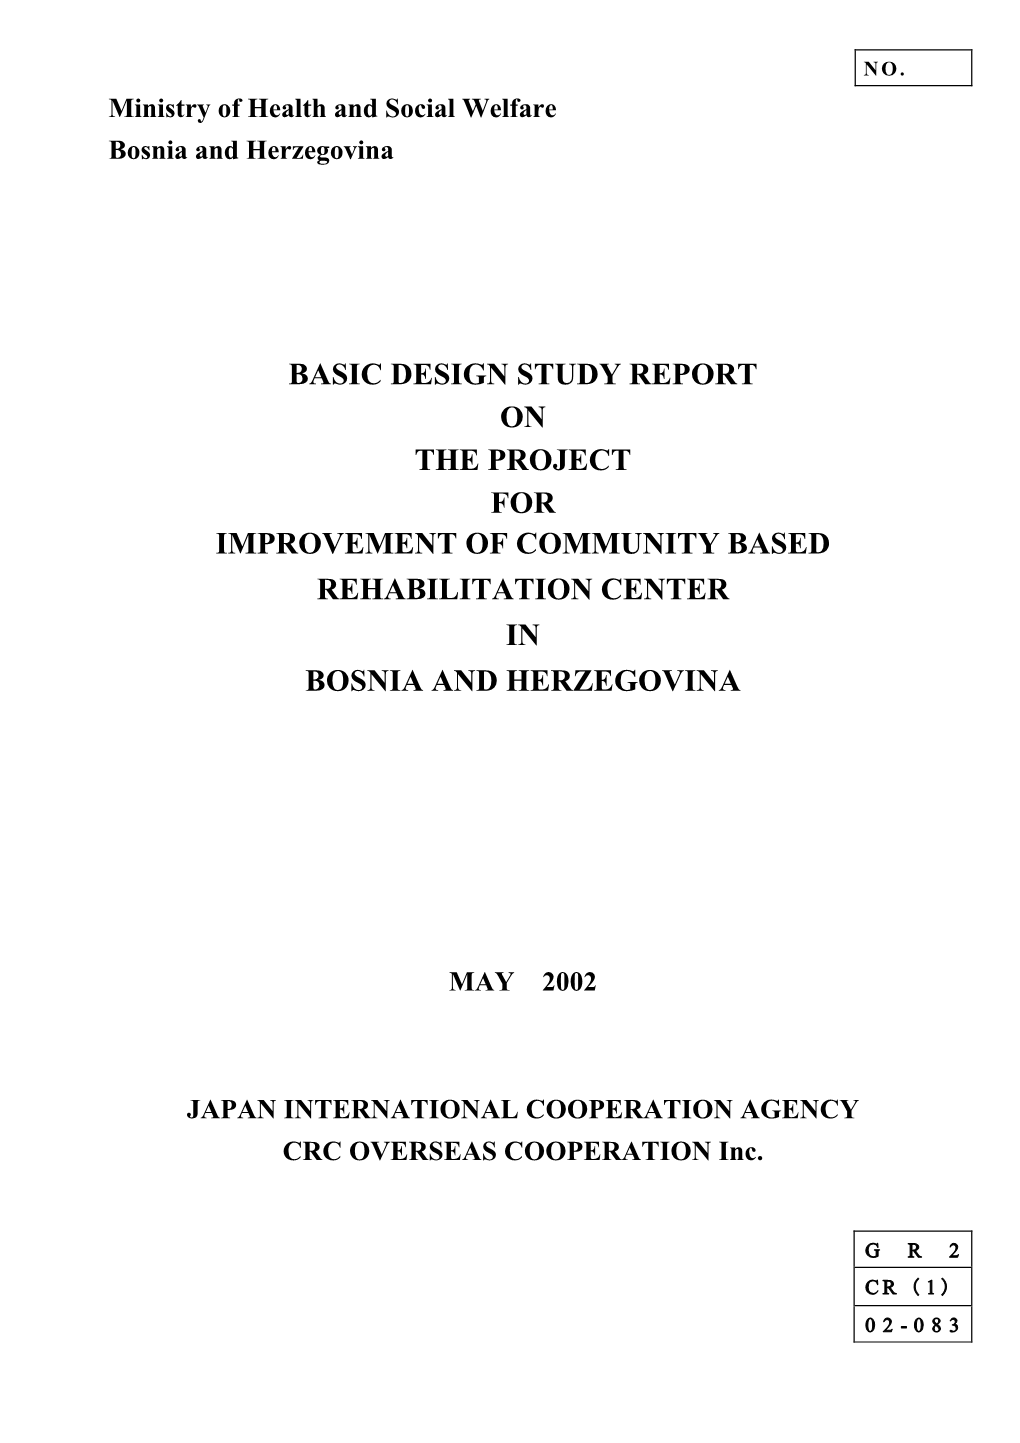 Basic Design Study Report on the Project for Improvement of Community Based Rehabilitation Center in Bosnia and Herzegovina